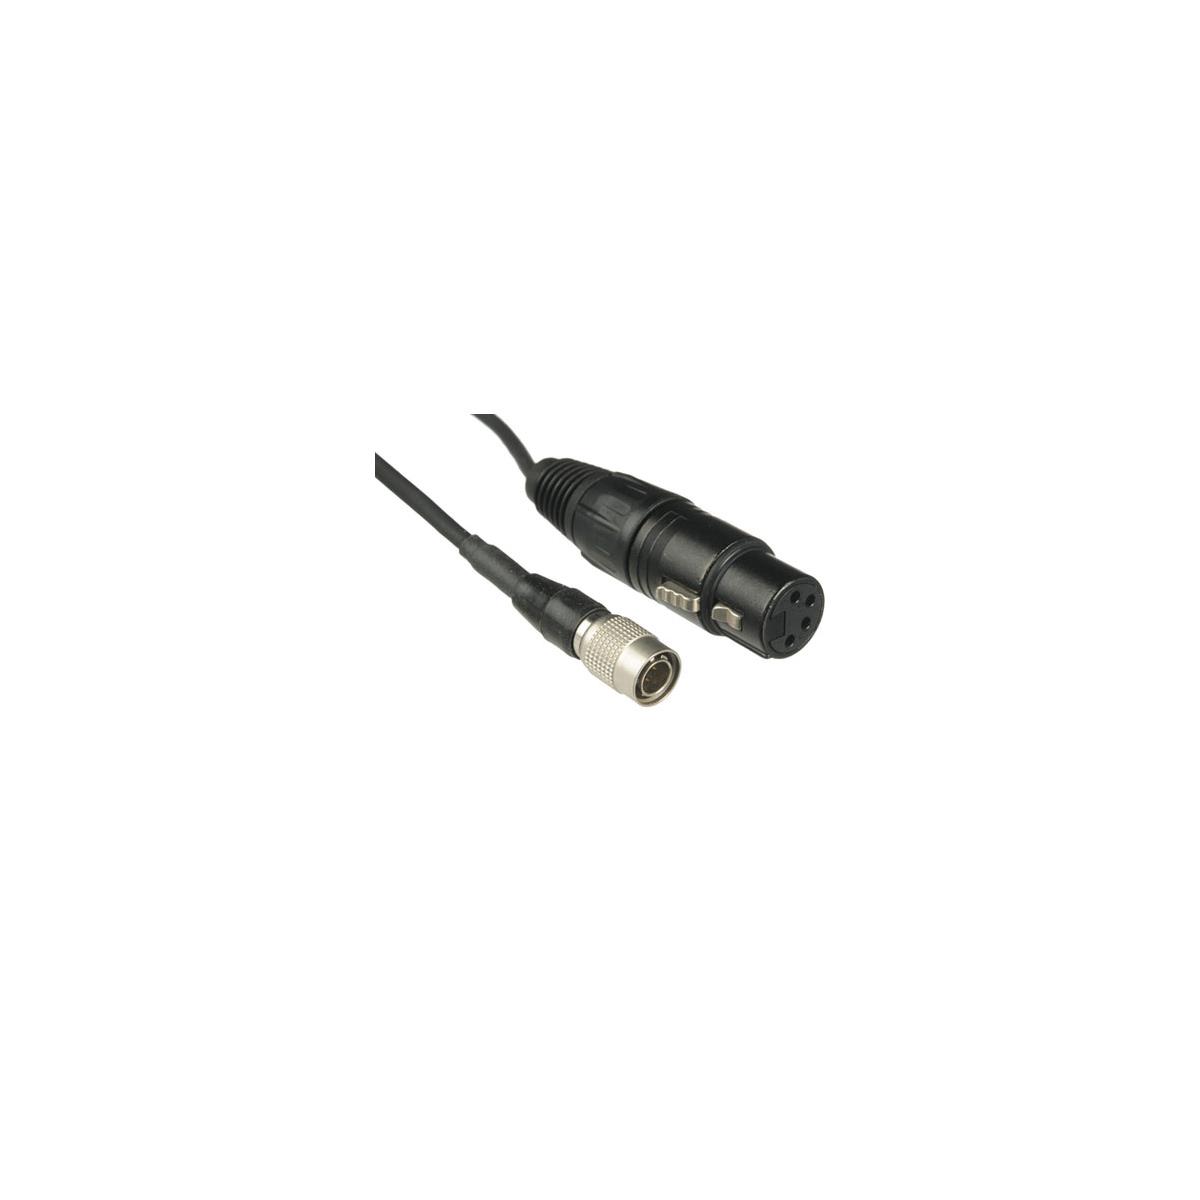 Image of Bebob Engineering COCO-AK-F3 12V Adapter Cable